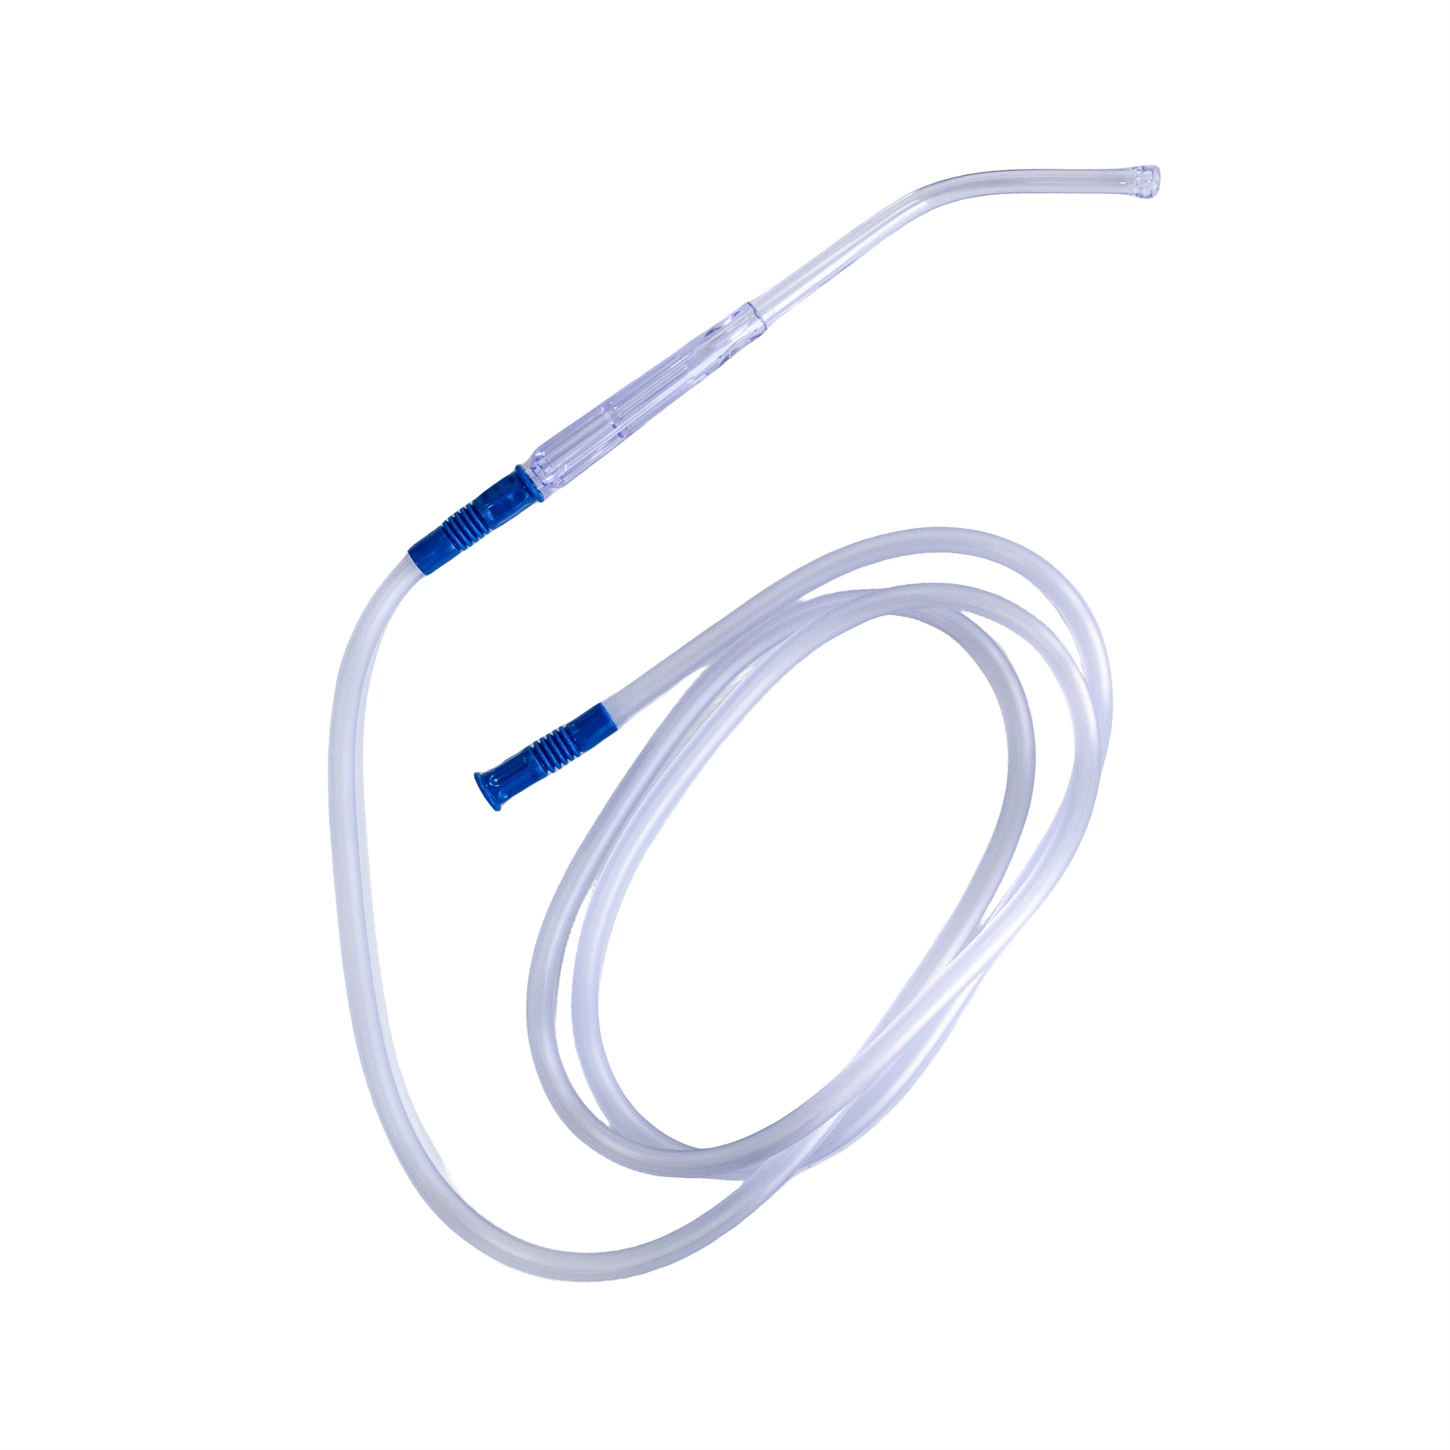 Disposable Soft Crown/ Standard Plain Tip Suction Connecting Tube with Yankauer Handle with CE/ISO/FDA